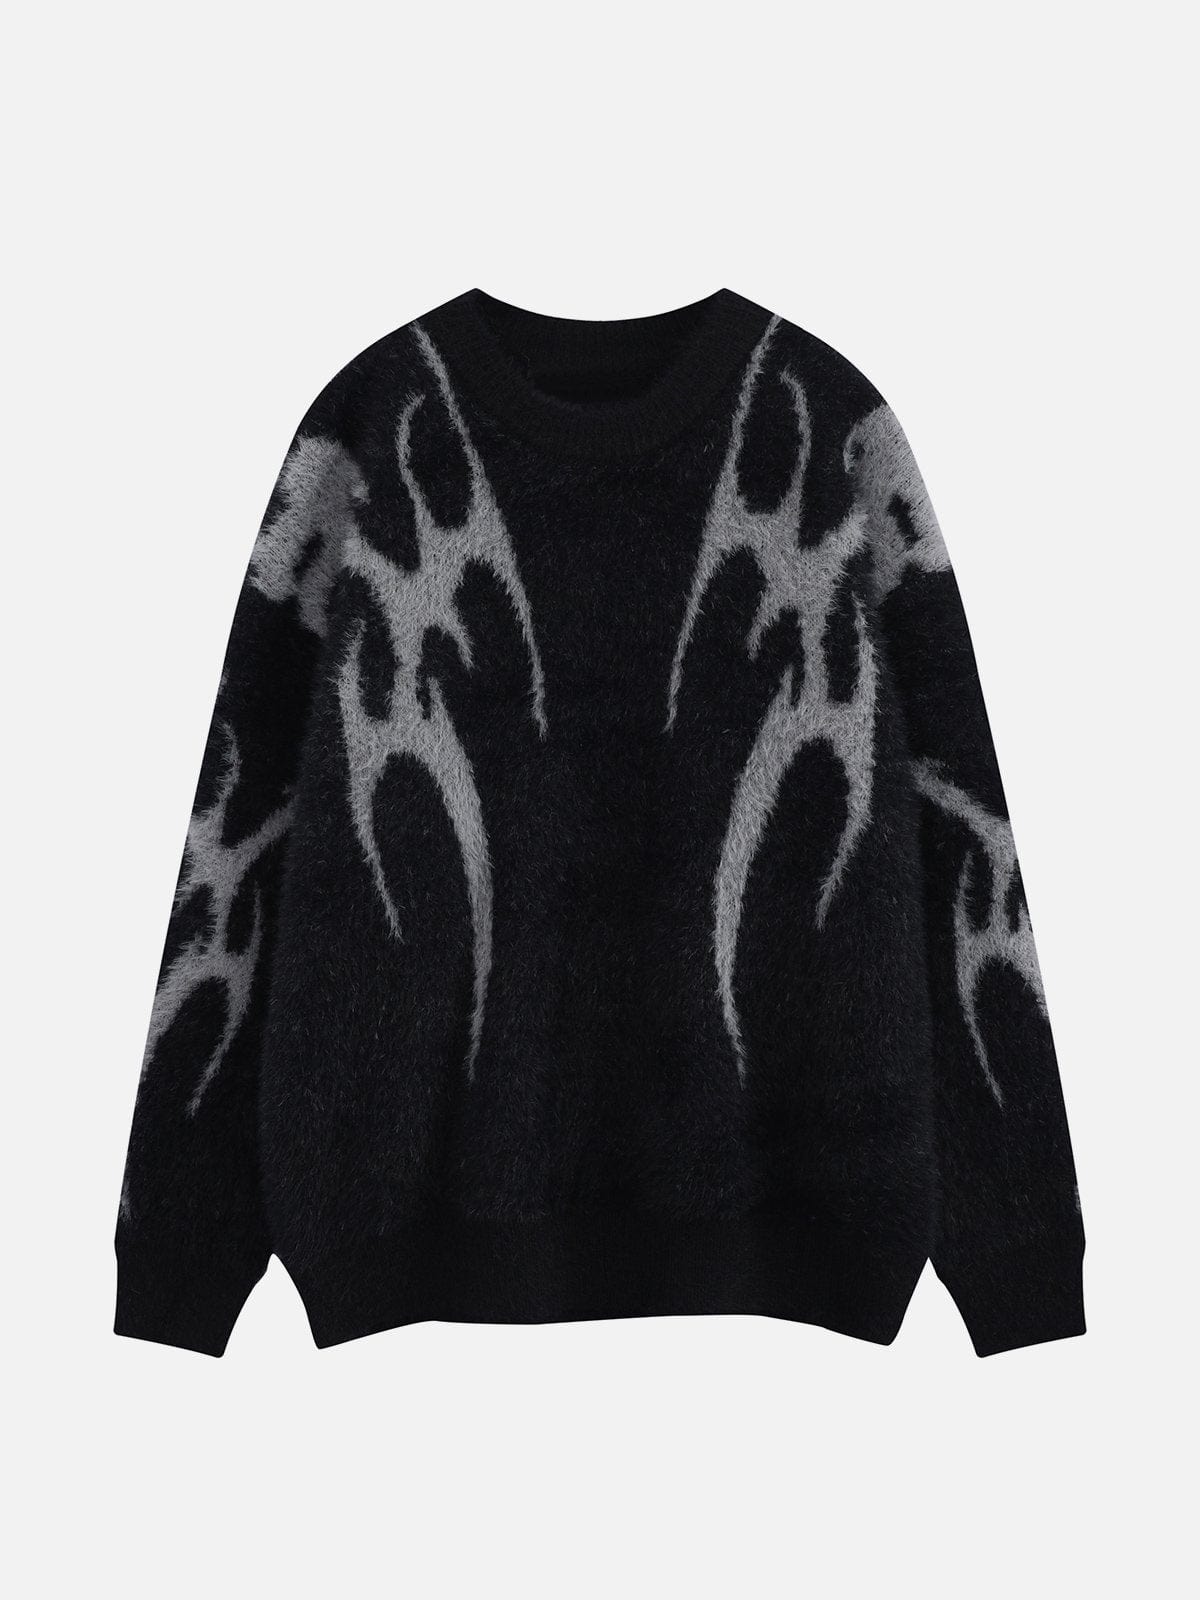 NEV 2.0 Flame Graphic Sweater